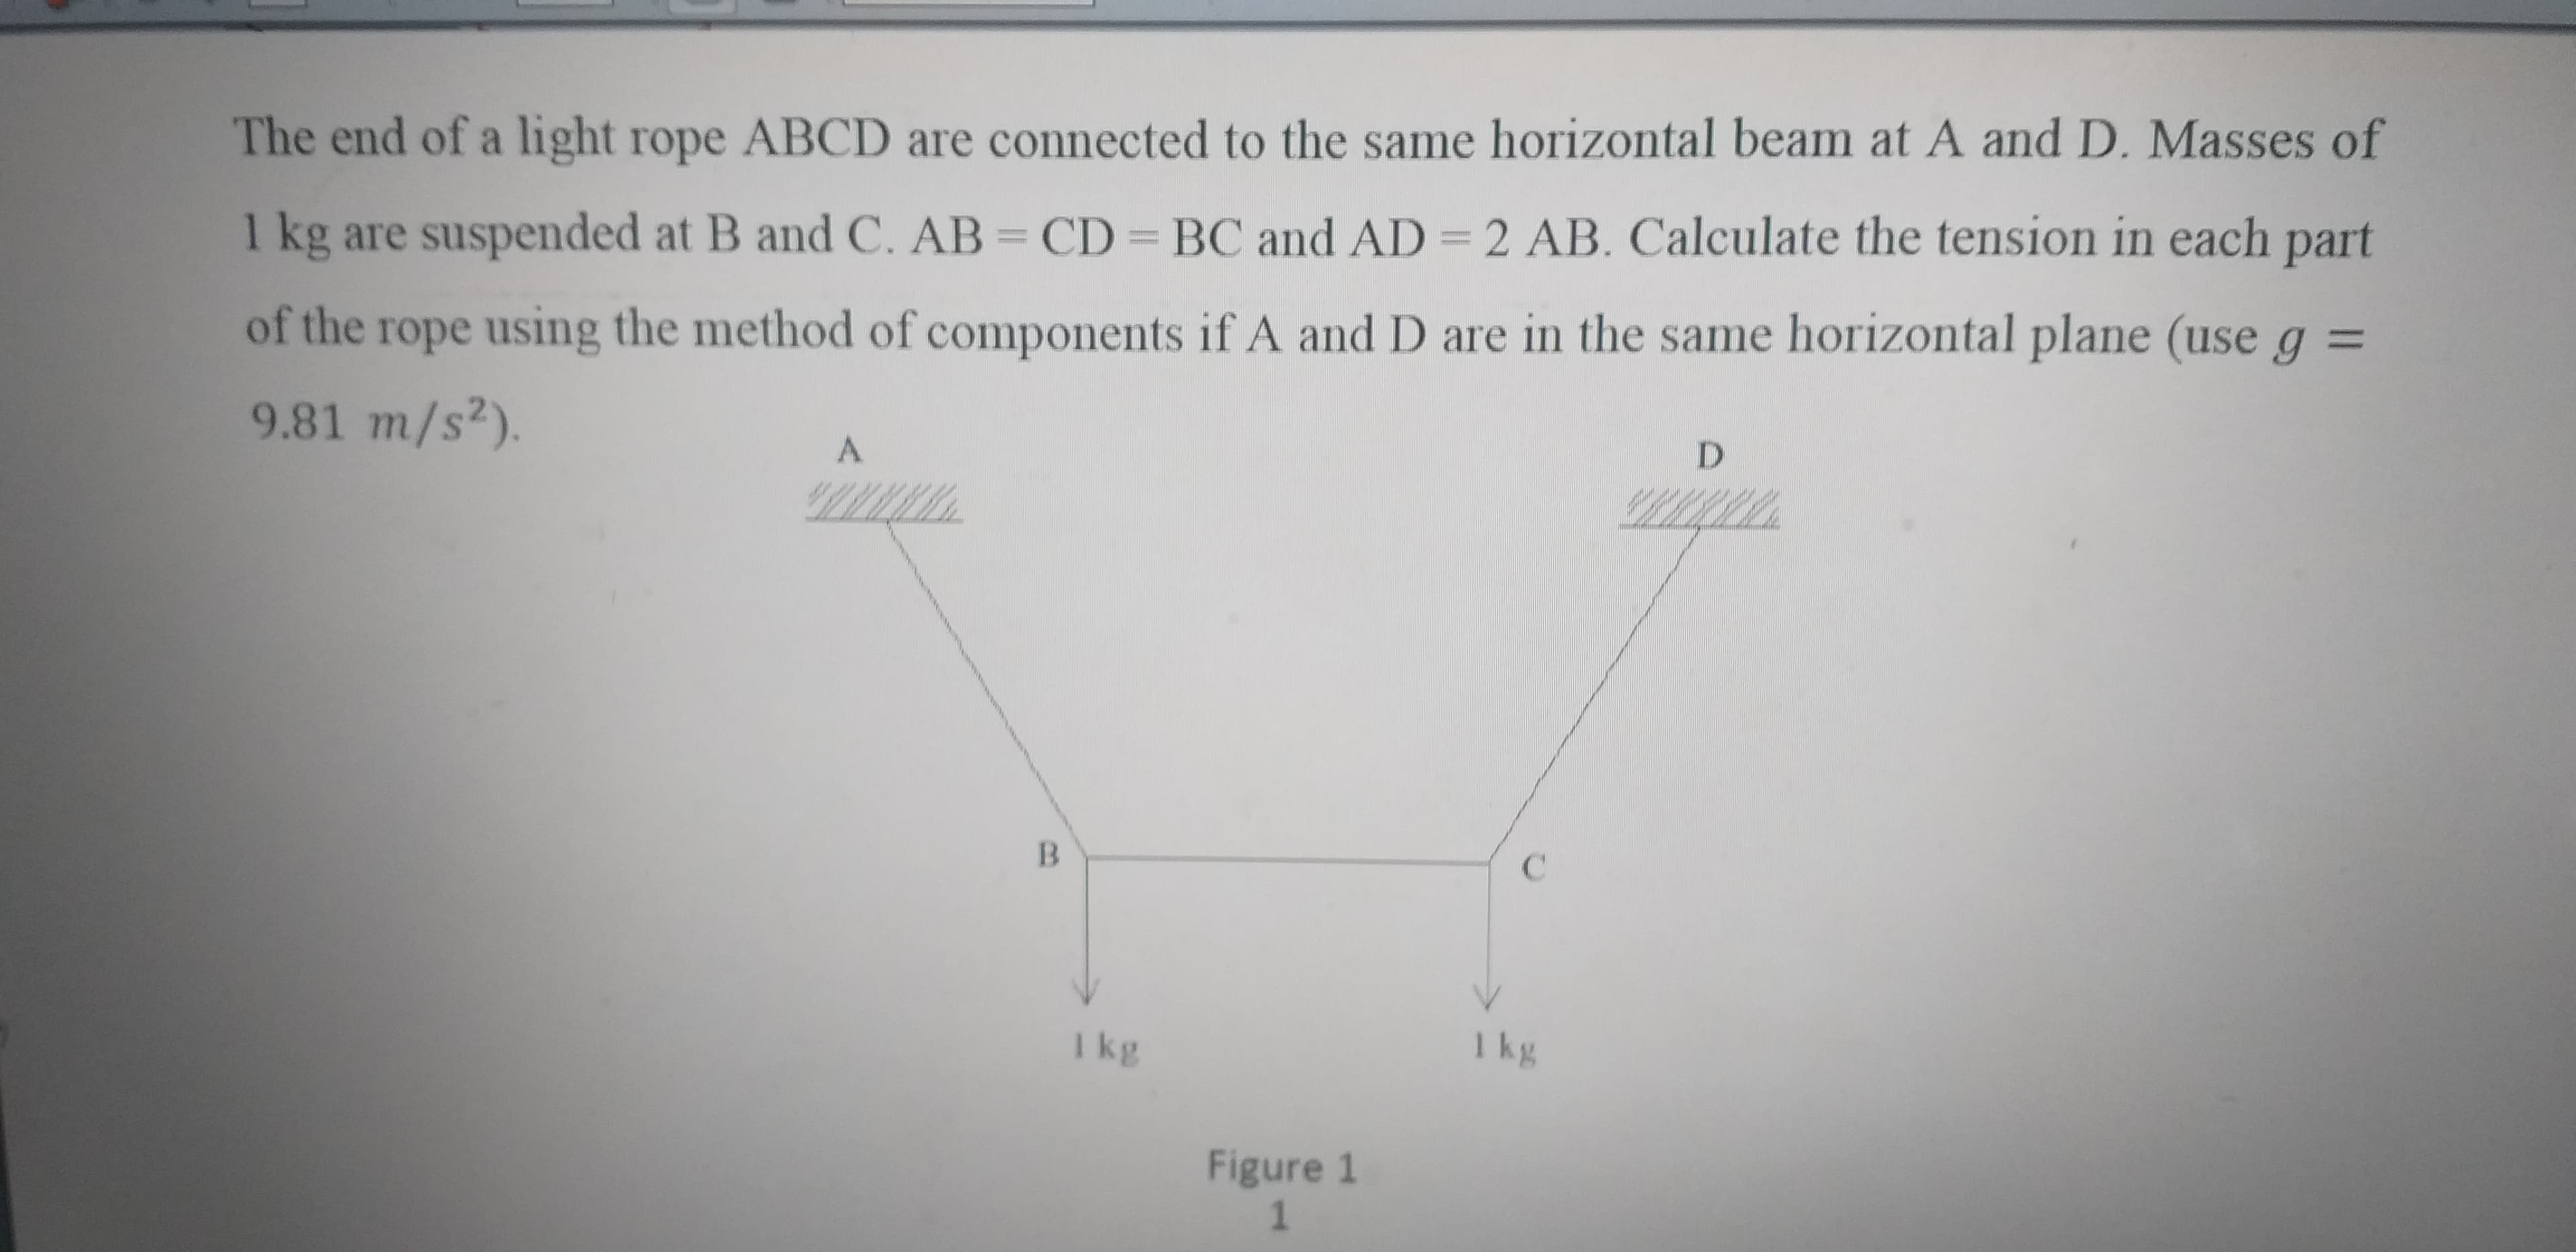 The end of a light rope ABCD are connected to the same horizontal beam at A and D. Masses of
1 kg are suspended at B and C. AB = CD BC and AD = 2 AB. Calculate the tension in each part
of the rope using the method of components if A and D are in the same horizontal plane (use g =
9.81 m/s2).
A.
